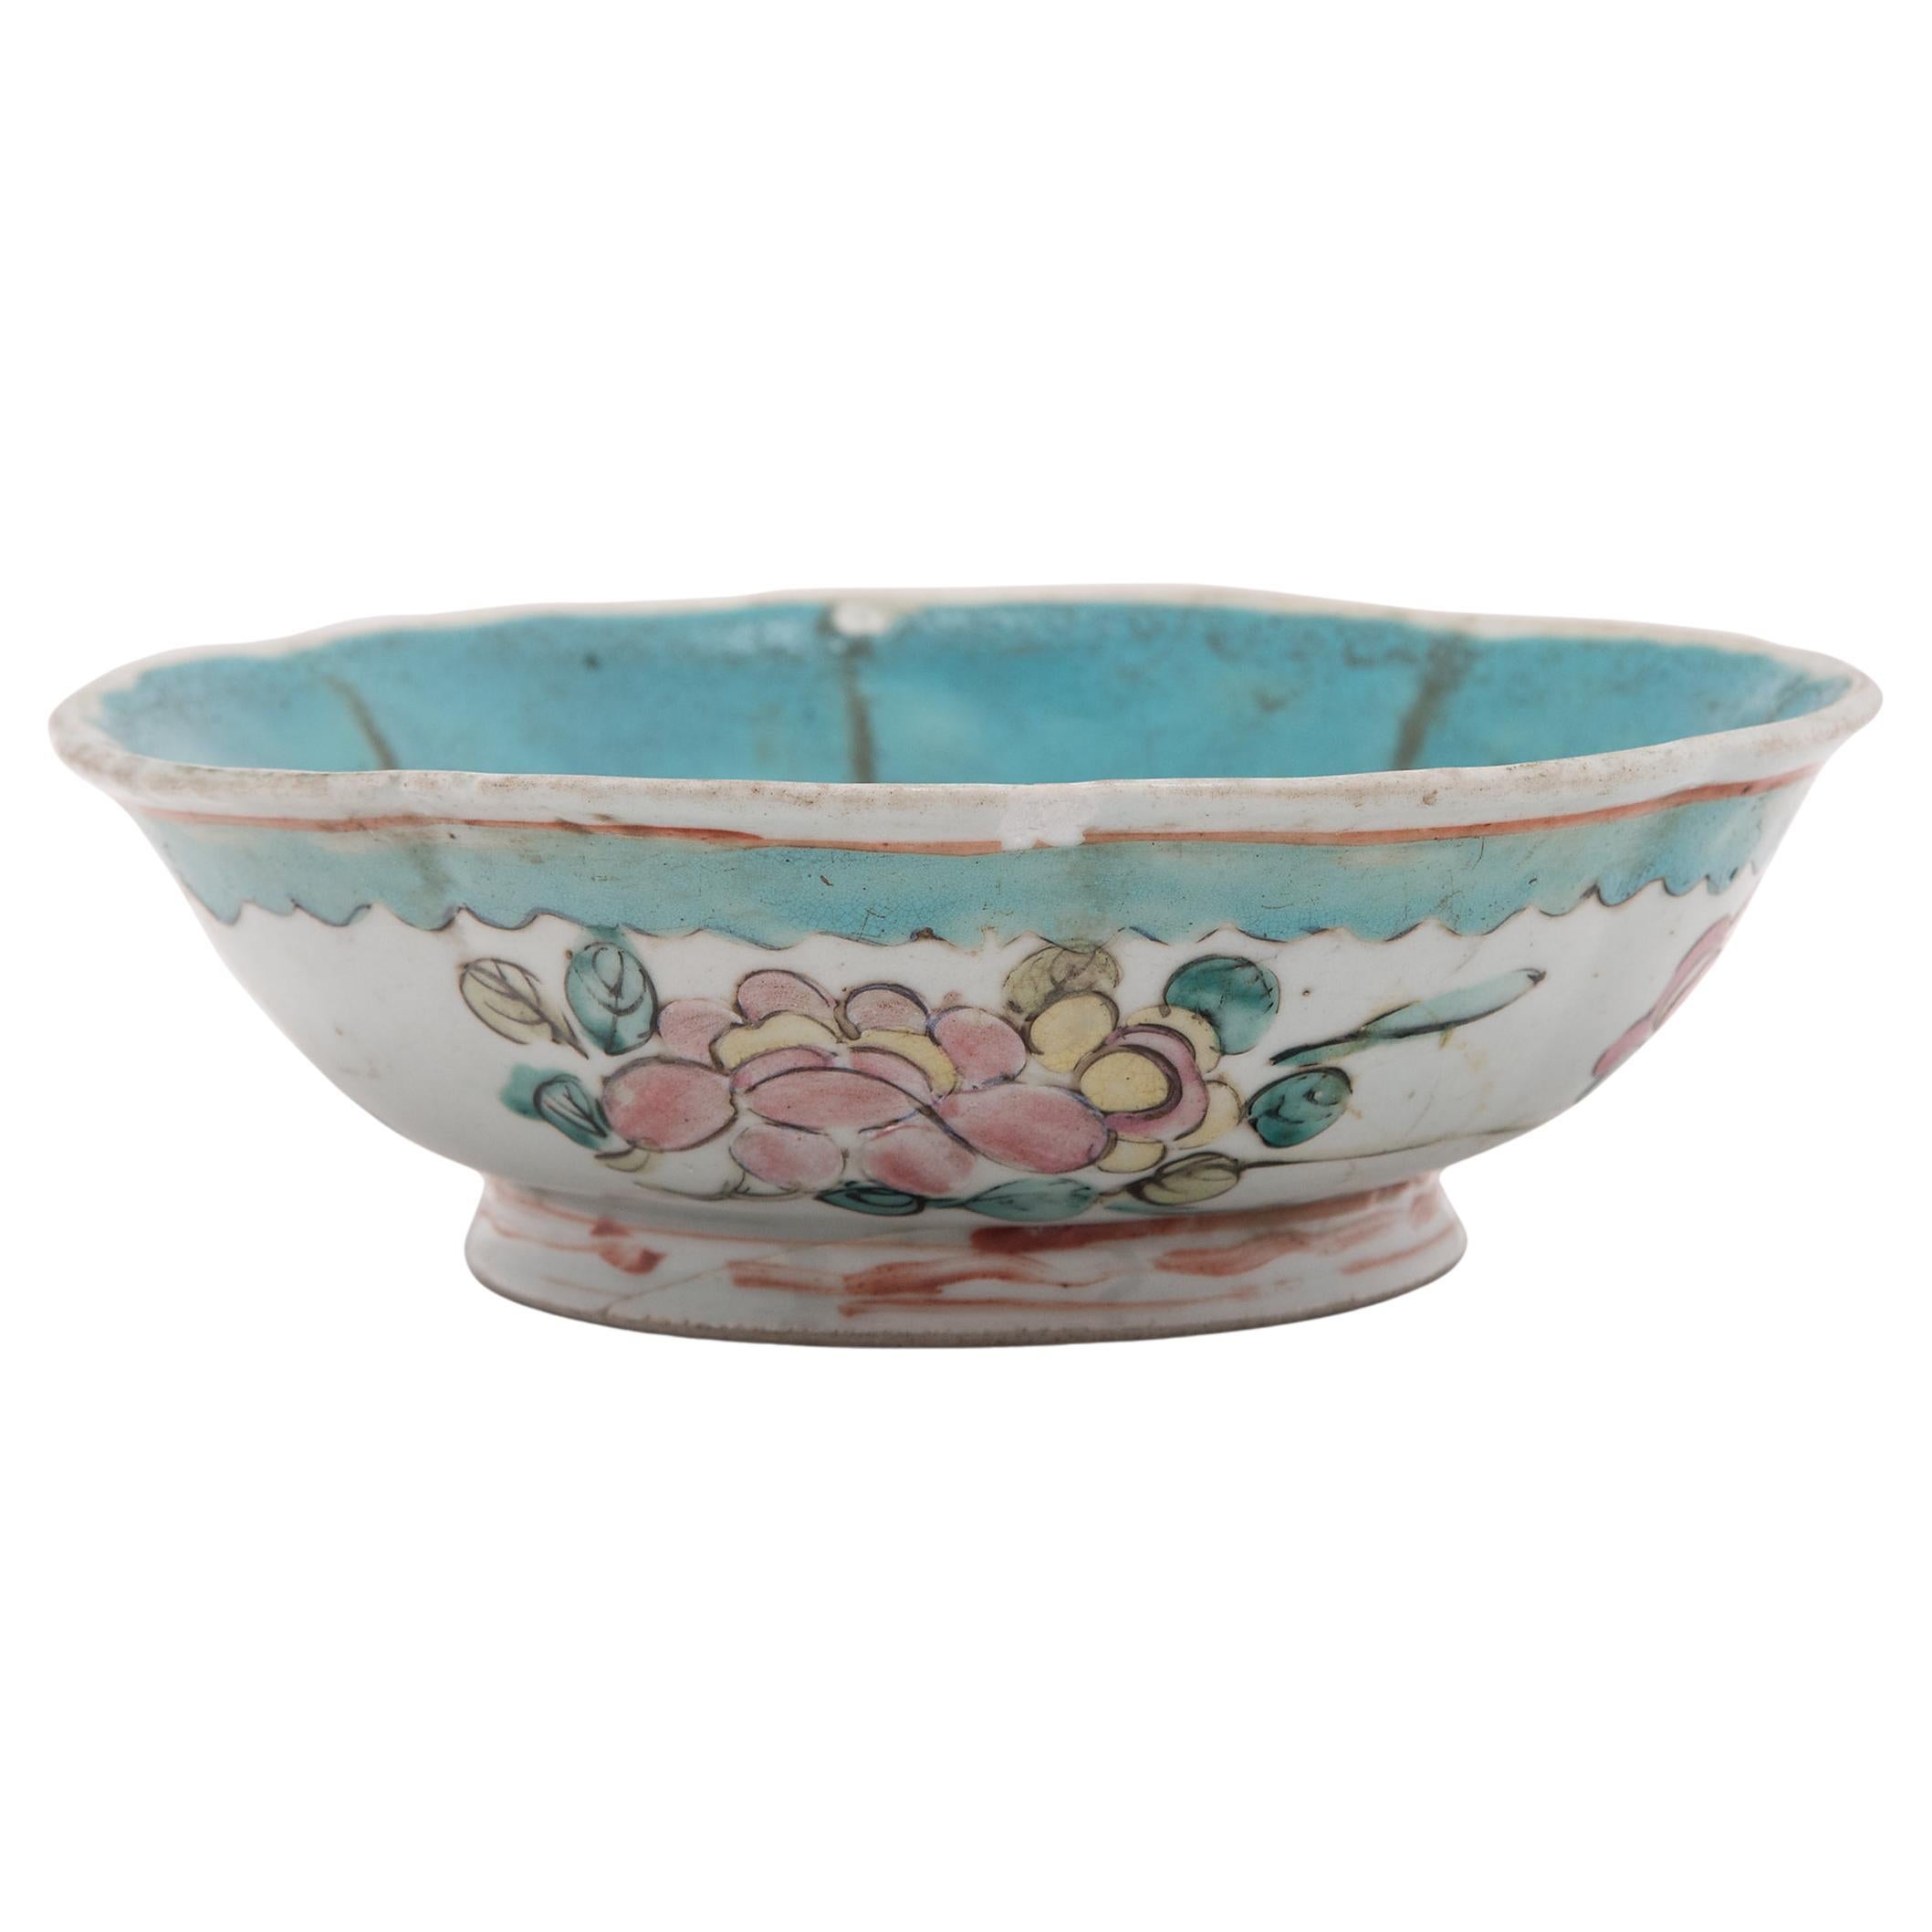 Chinese Floral Offering Bowl, c. 1850